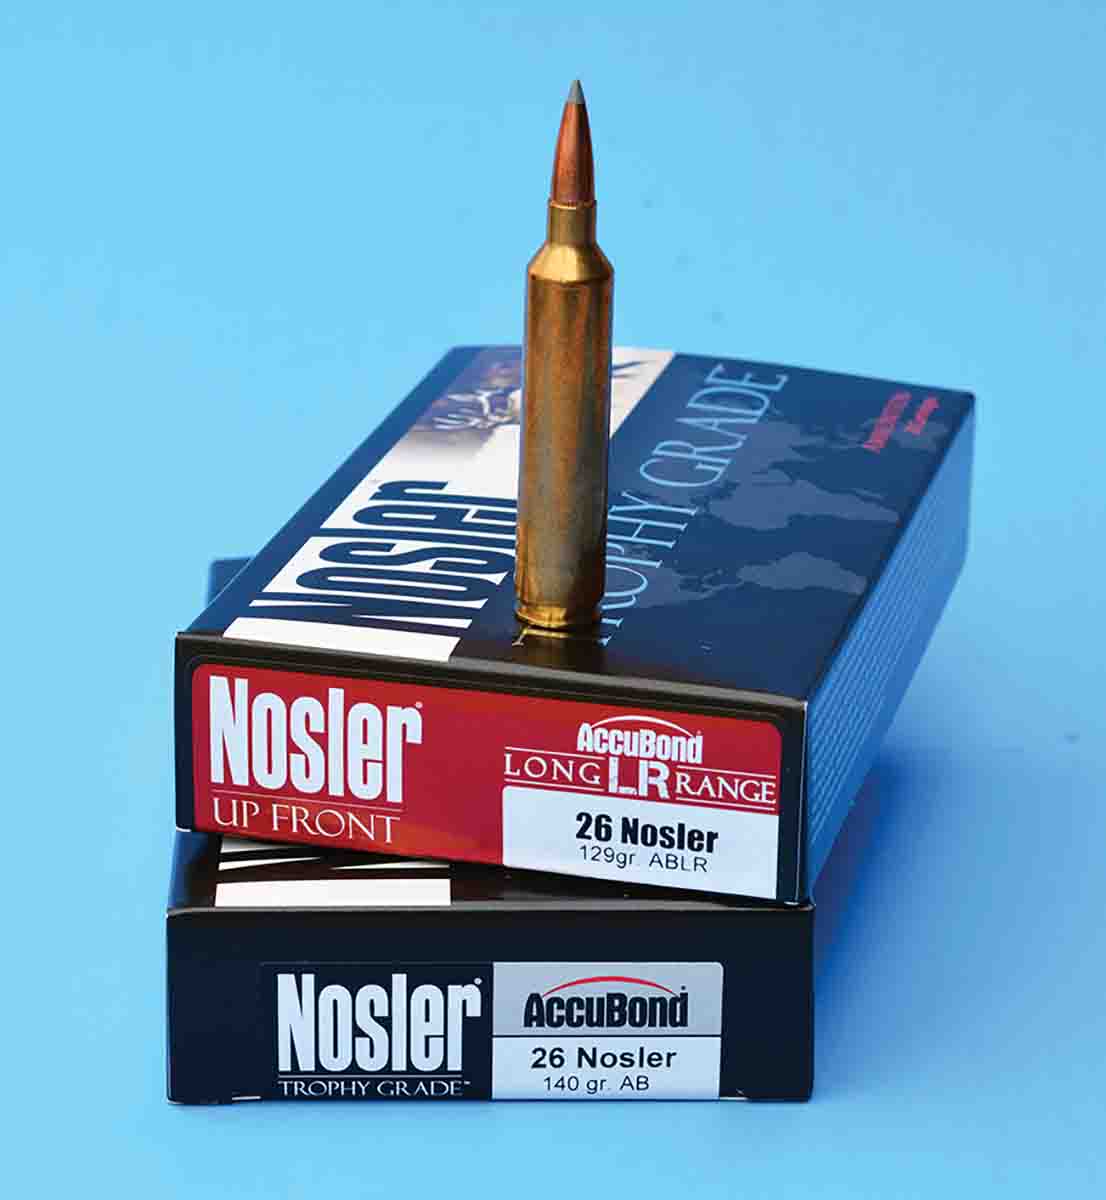 The .26 Nosler offers an unusually flat trajectory that is useful when hunting in open country. Nosler is currently offering seven factory loads that serve to increase its versatility in the field.